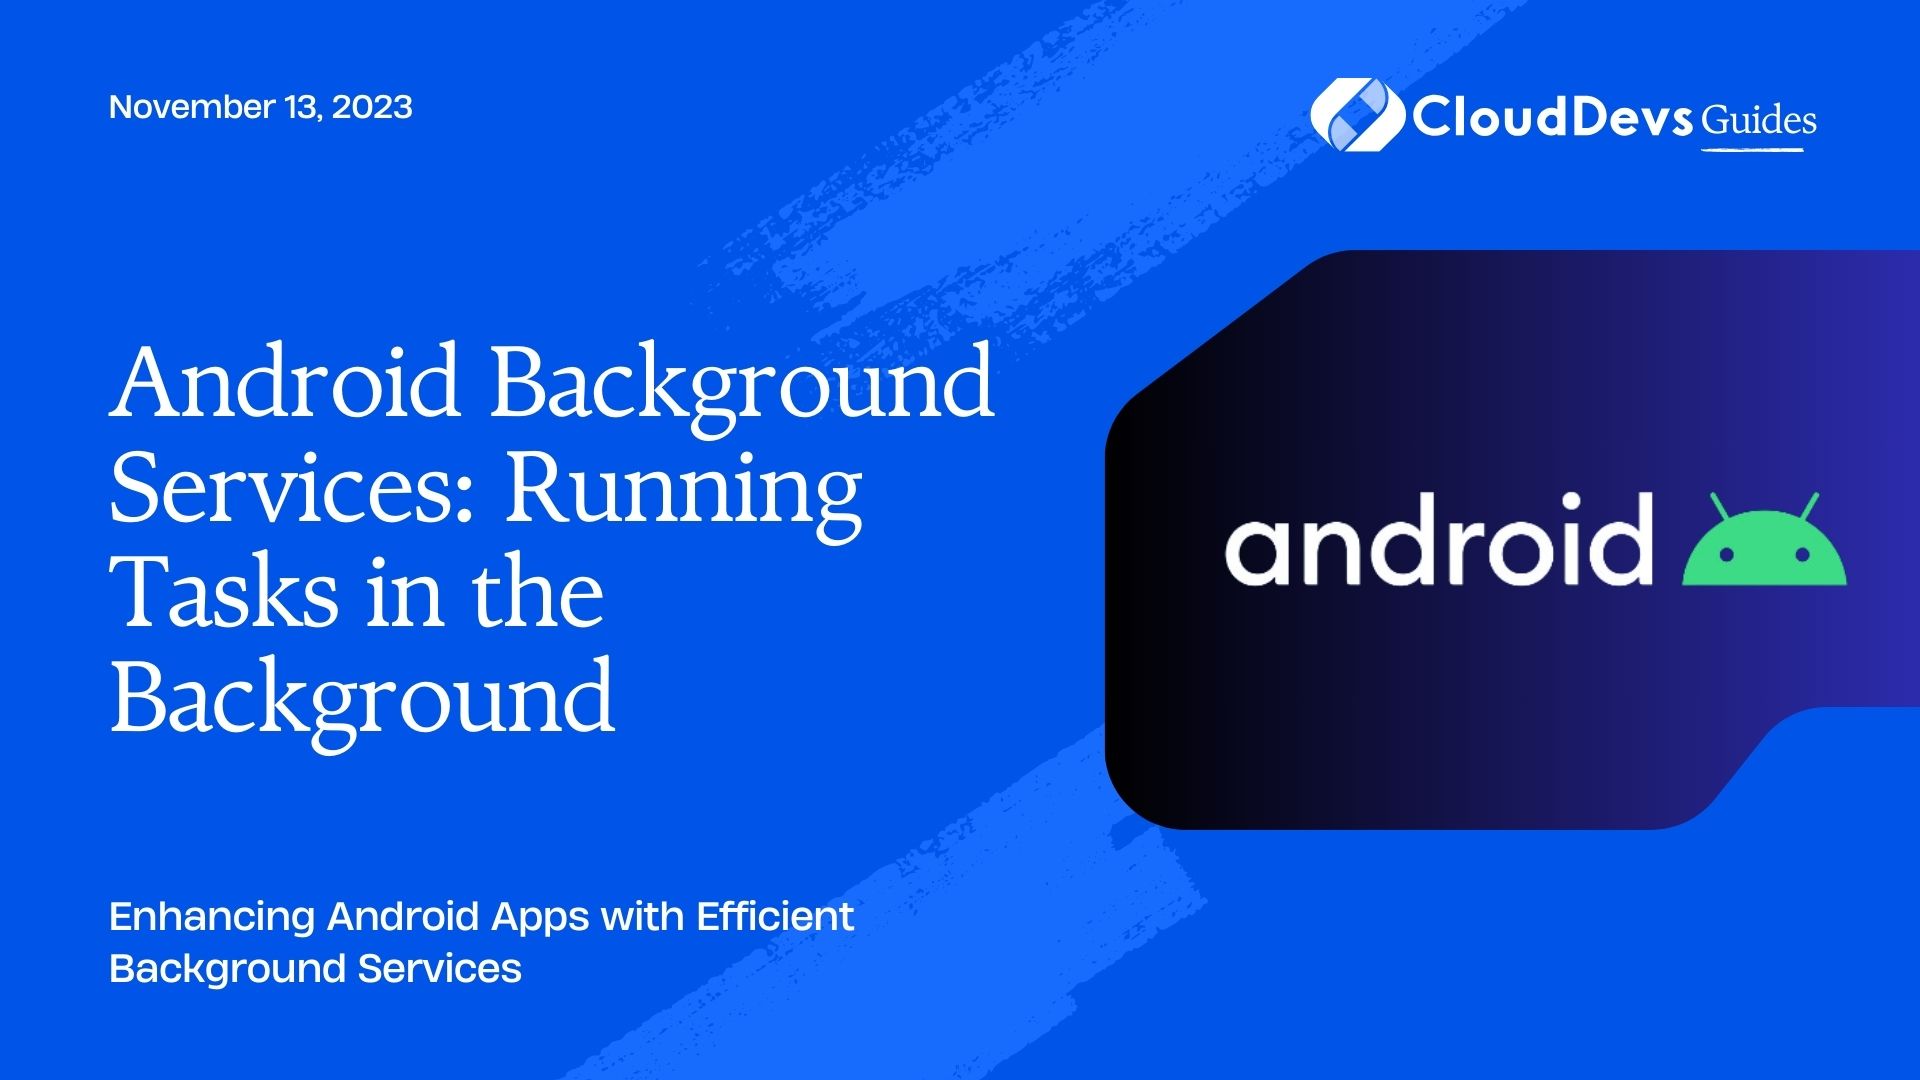 Android Background Services: Running Tasks in the Background